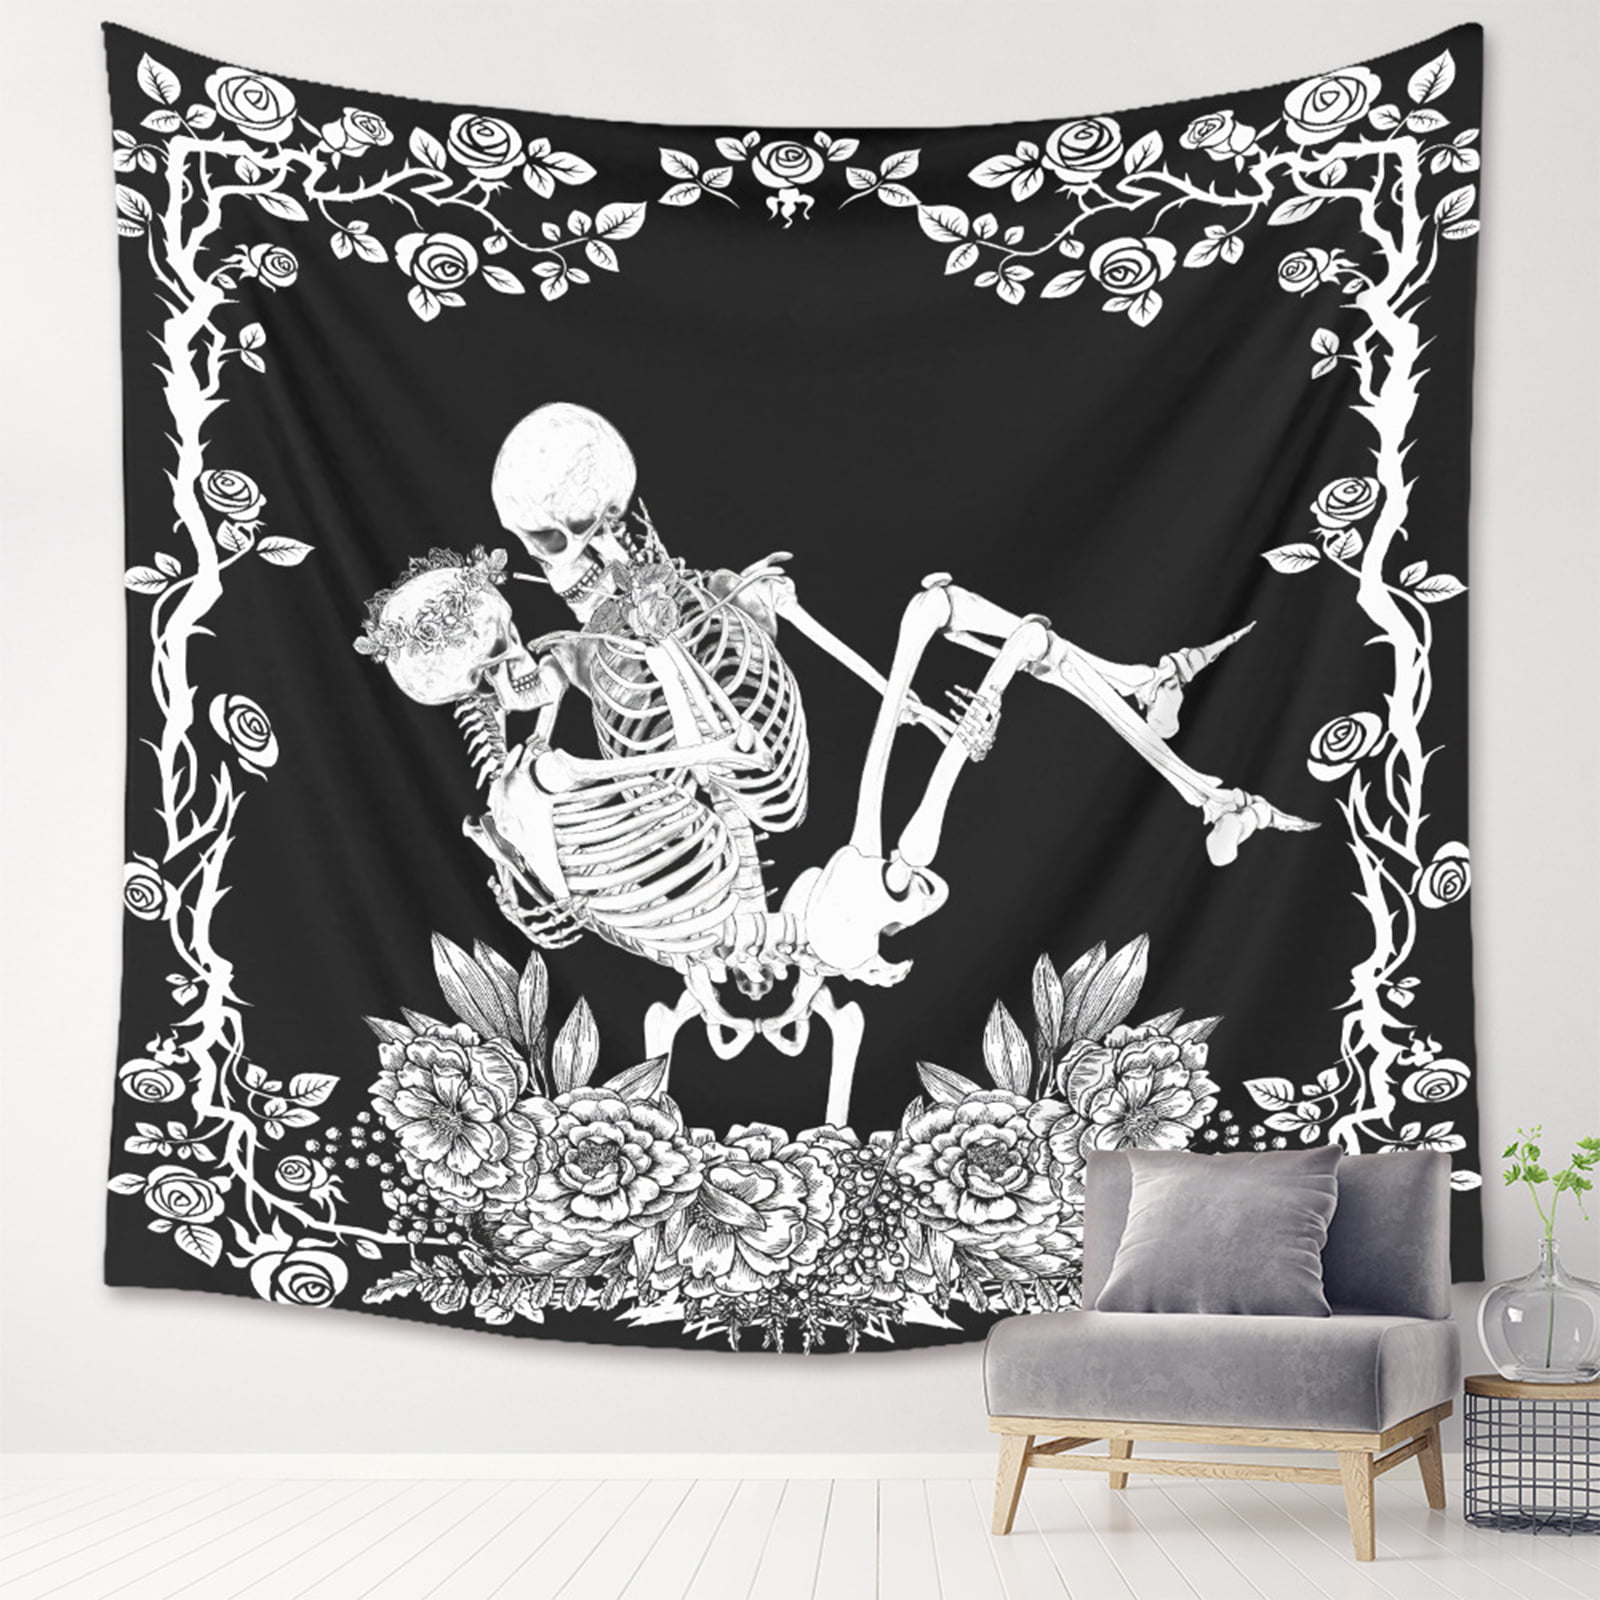 One opening Skull Tapestry, The Kissing Lovers Tapestry Wall Hanging, Black  and White Romantic Constellation Skeleton Tapestry - Walmart.com